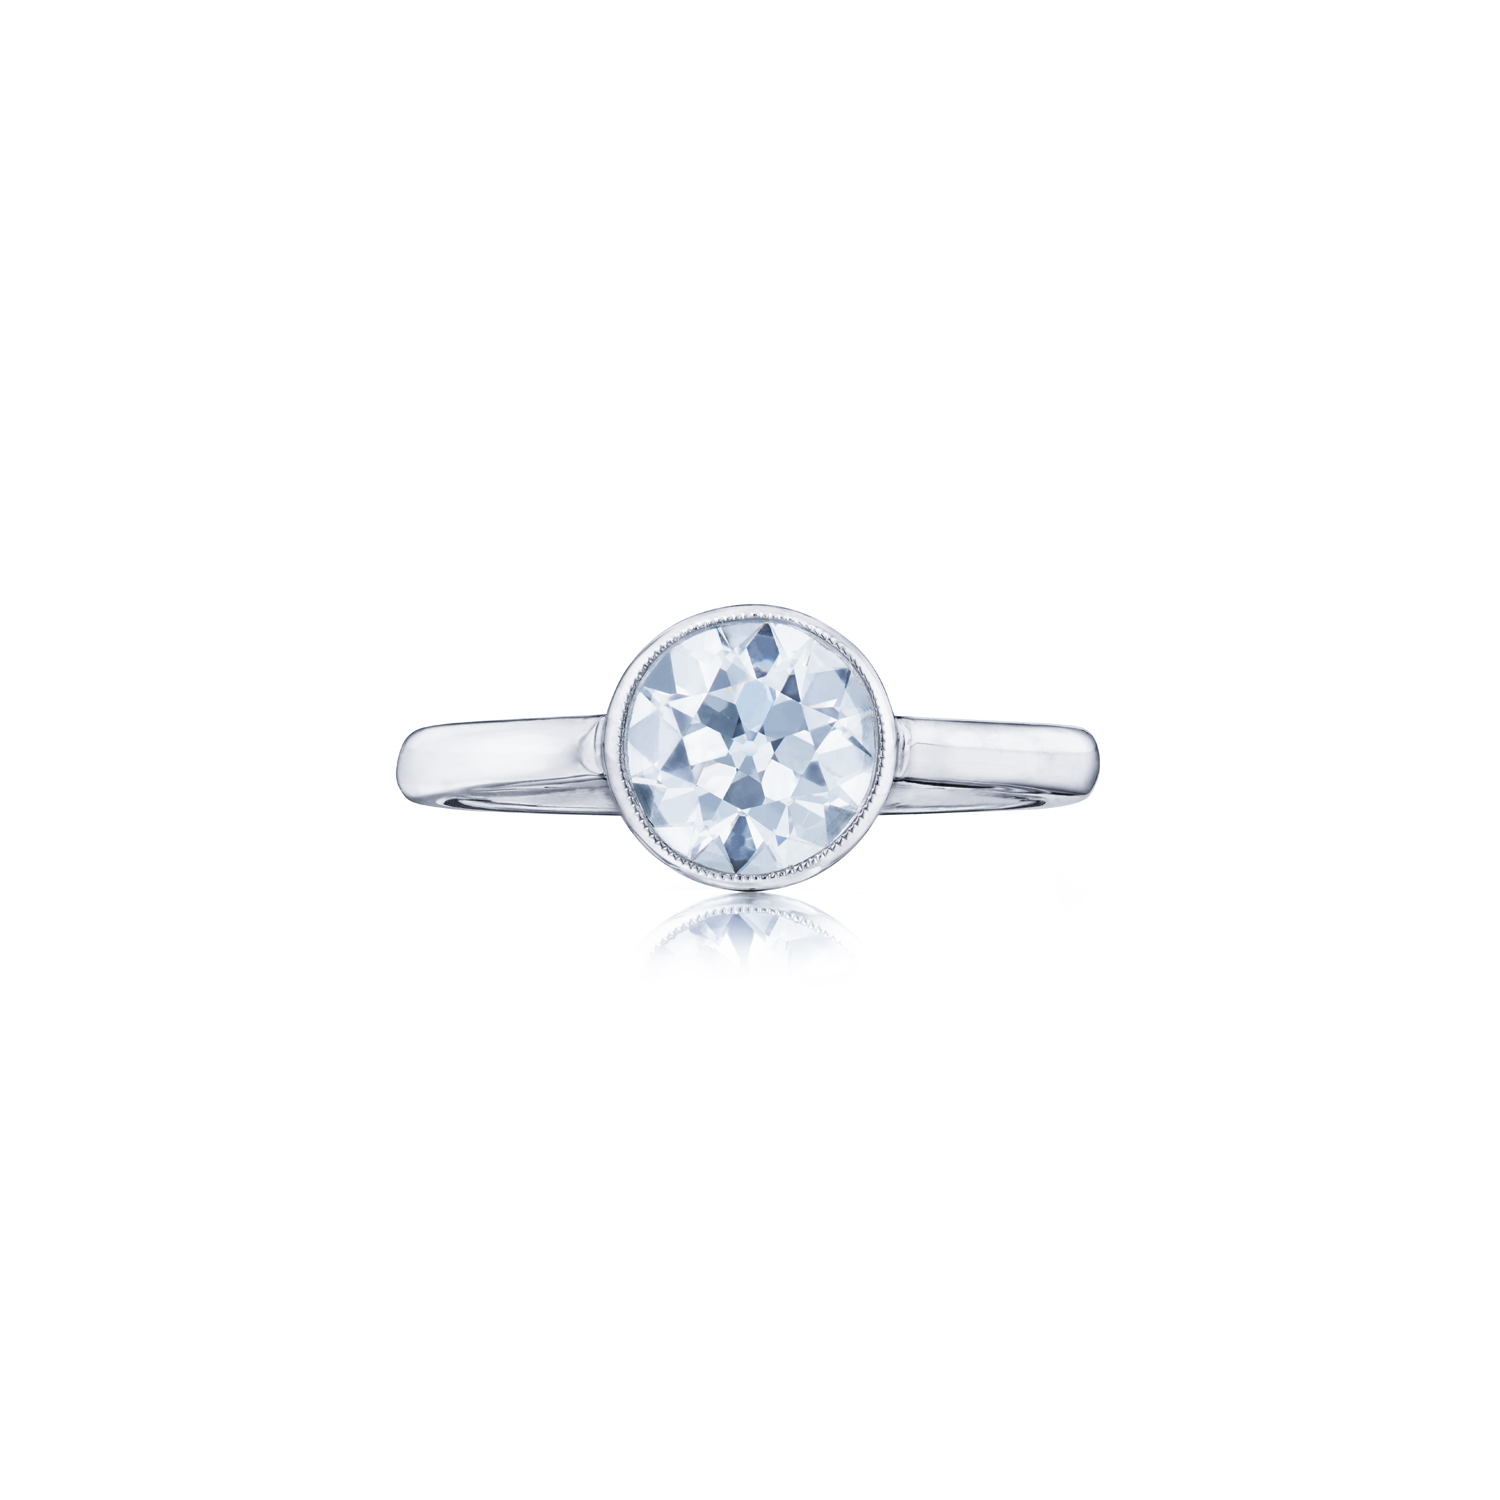 Fred Leighton Round Diamond Engagement Ring with a Milgrain Bezel in Platinum, Style F-1021FLOE-0-DIA-PLAT